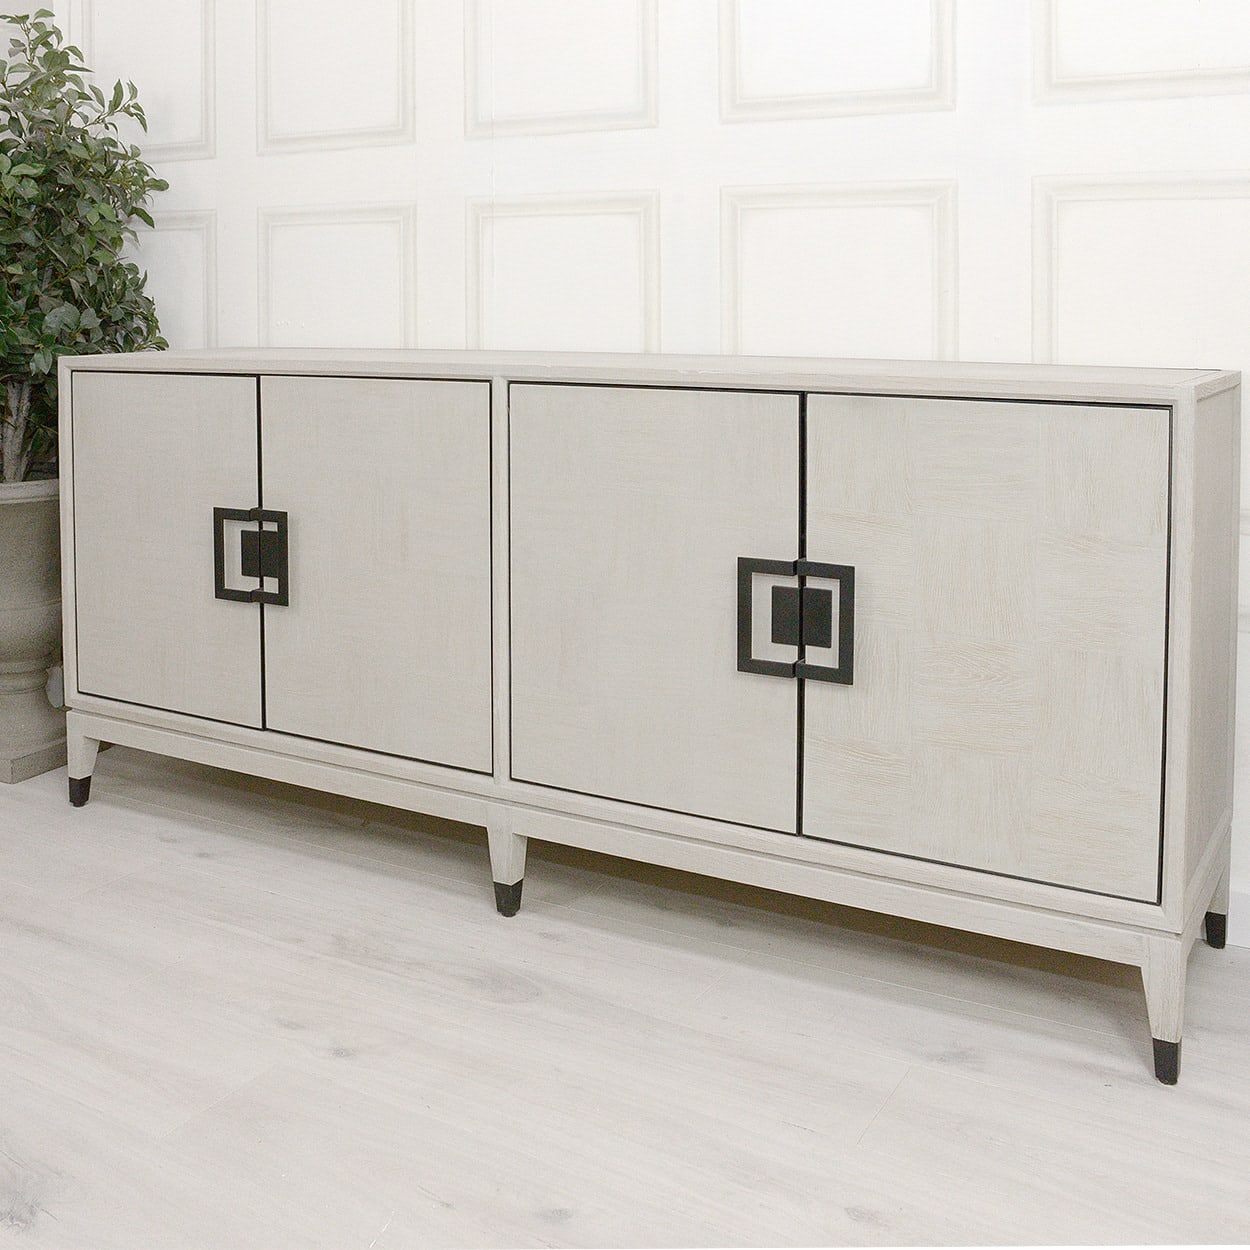 Astor Squares White 4 Door Sideboard from the Boho Furniture Collection